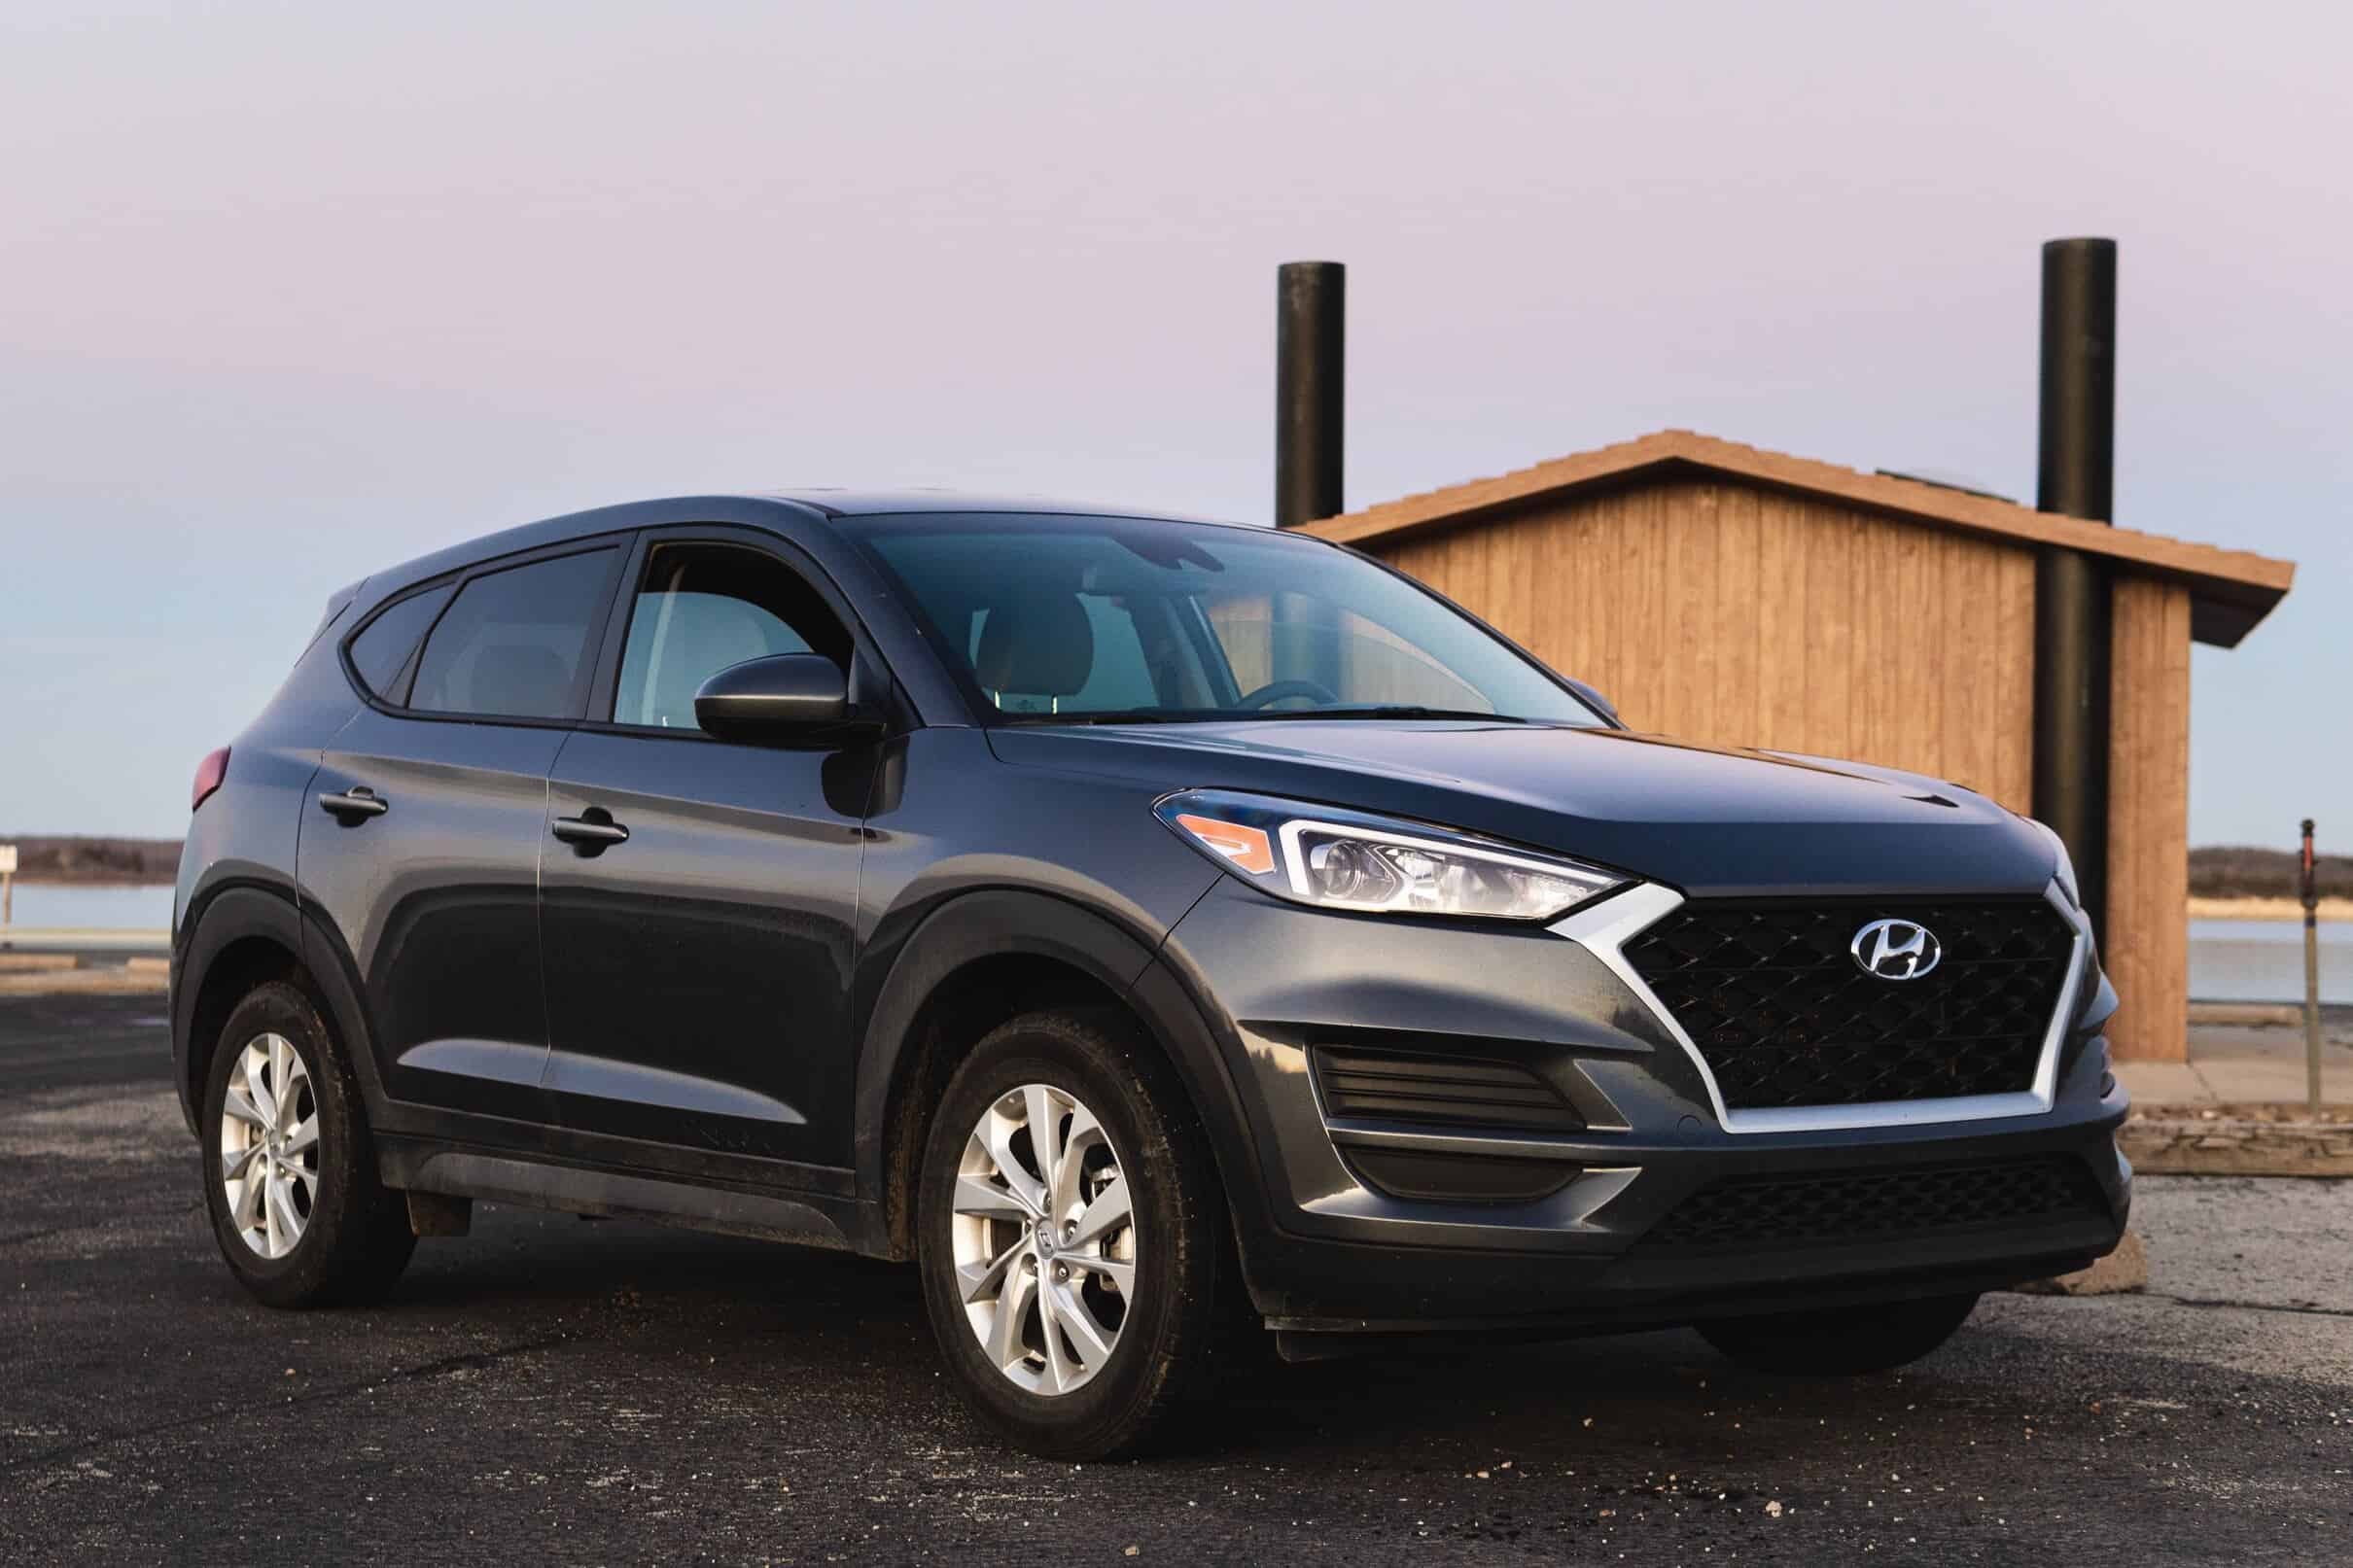 A Hyundai Tucson SUV parked in a scenic countryside landscape.